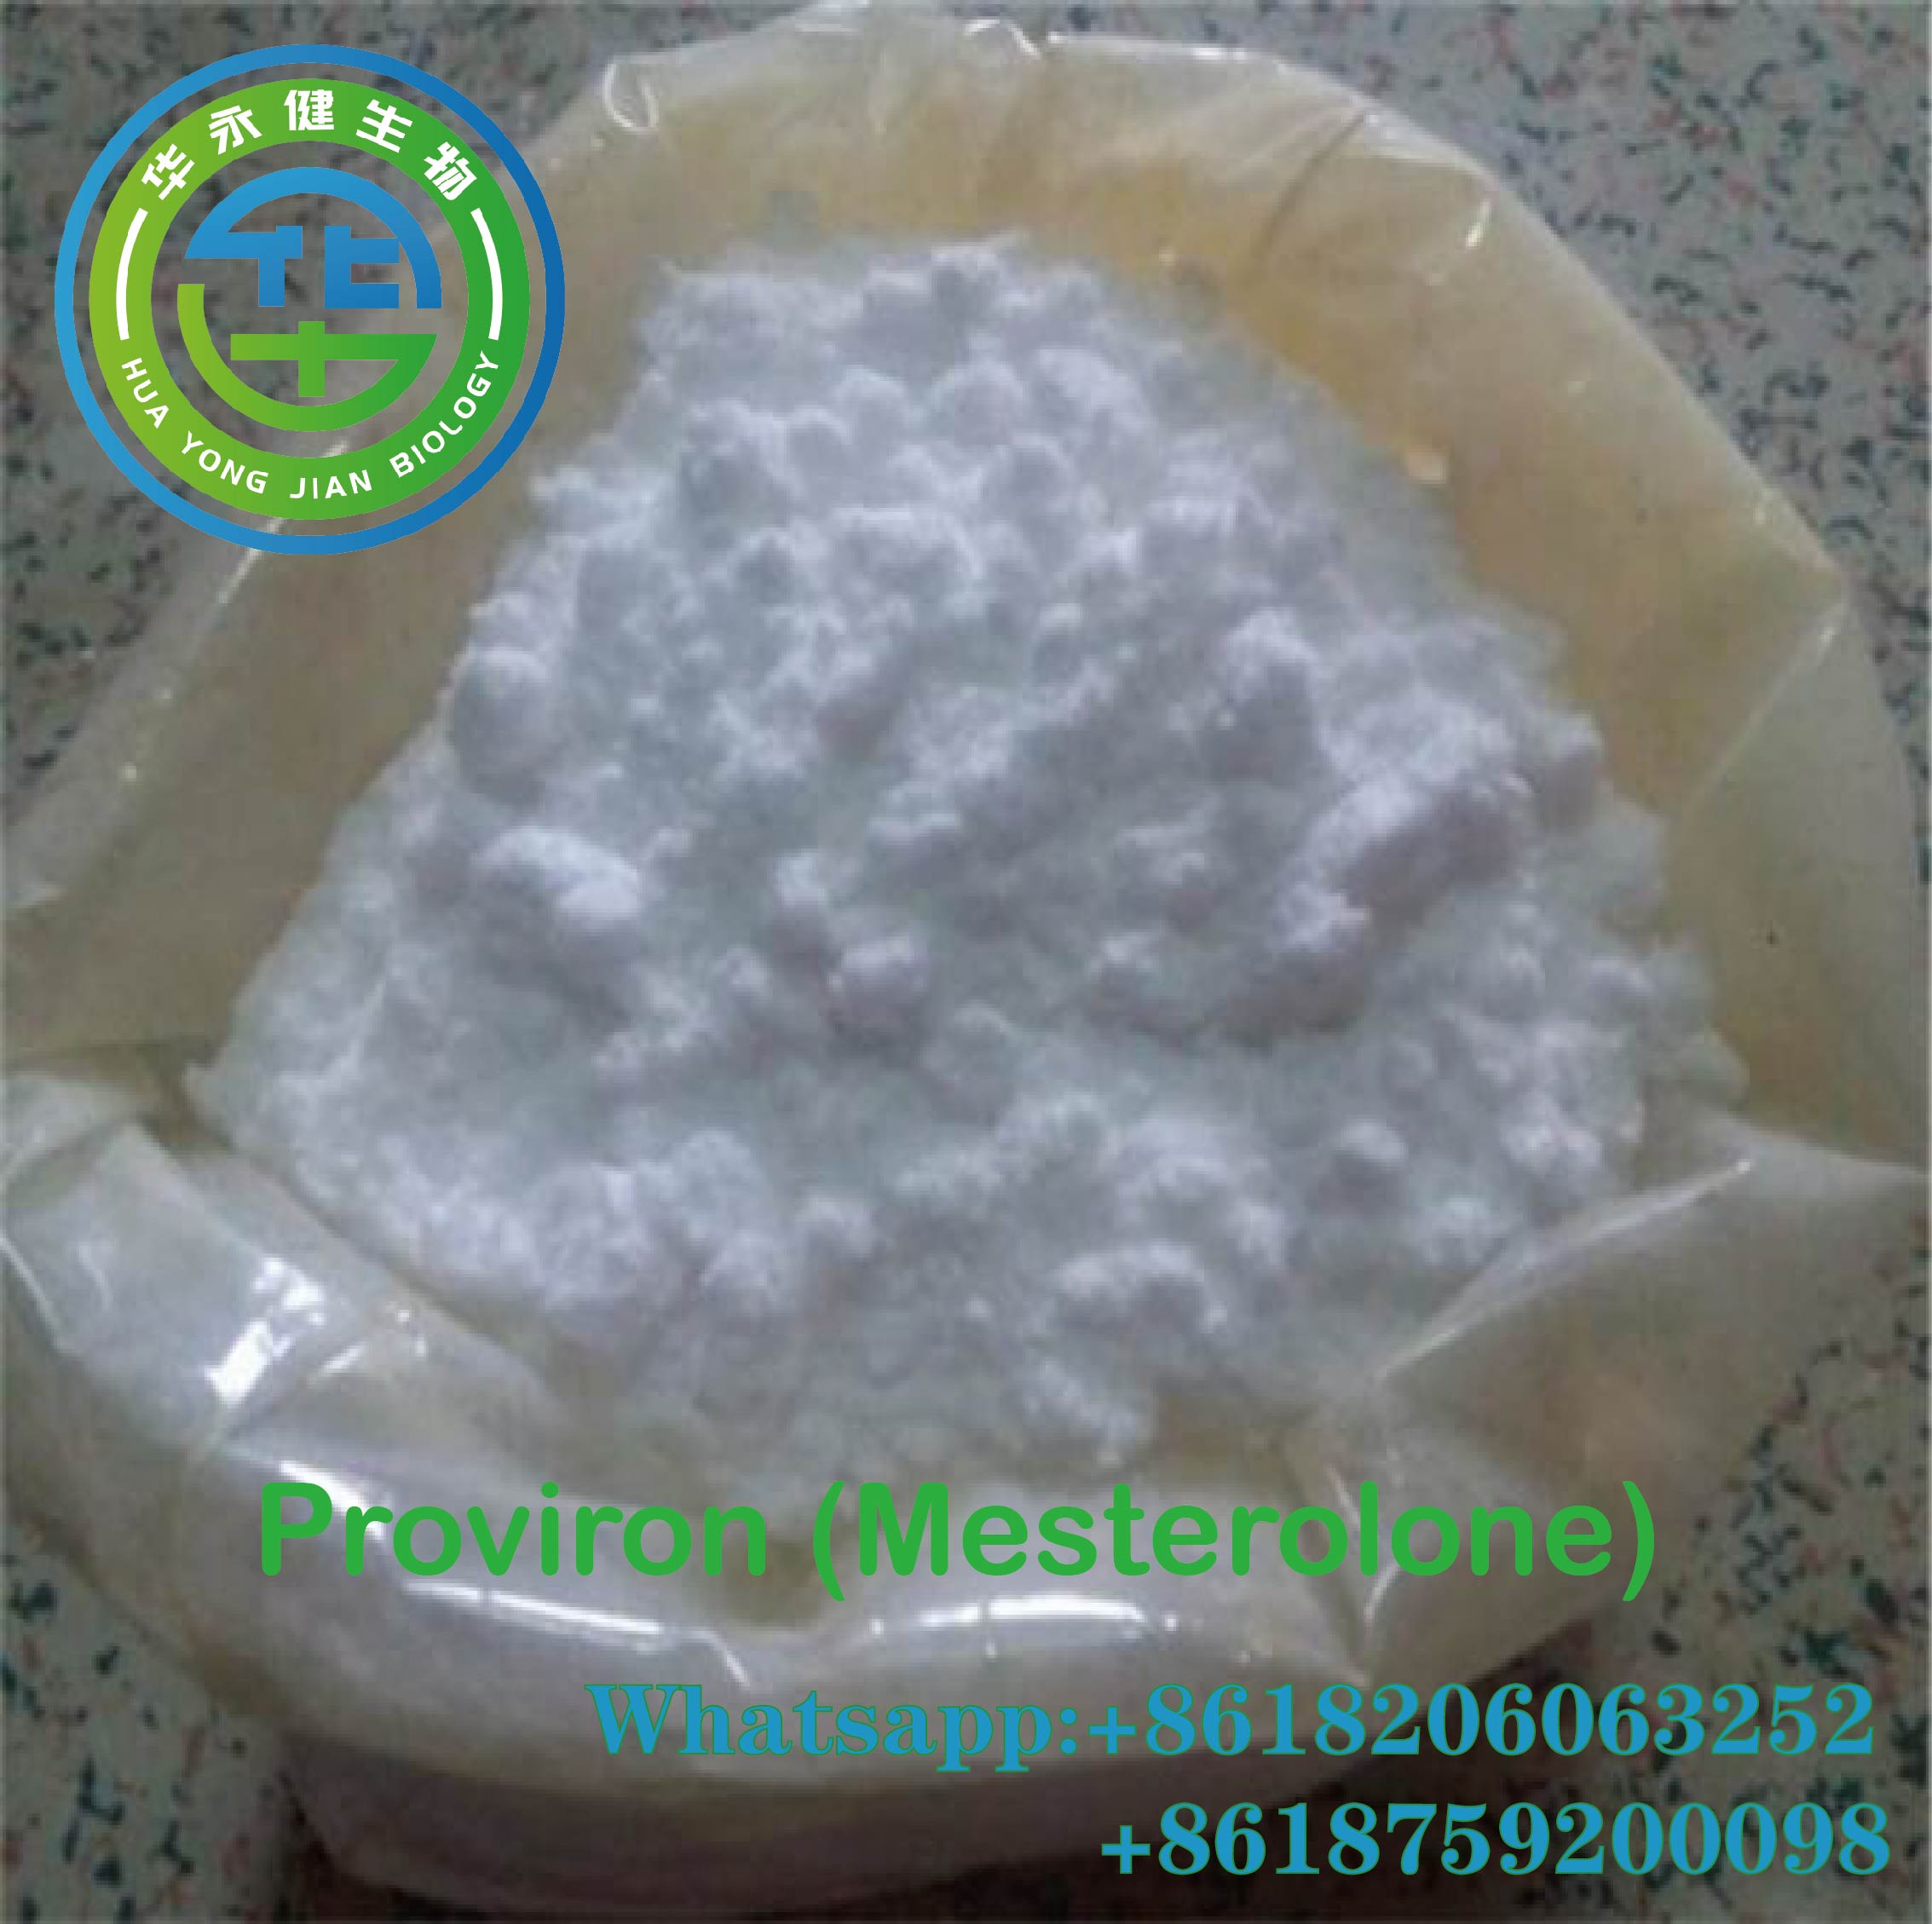 Proviron (Mesterolone) Powder Muscle Building Strong Effects USP Standard CasNO.1424-00-6